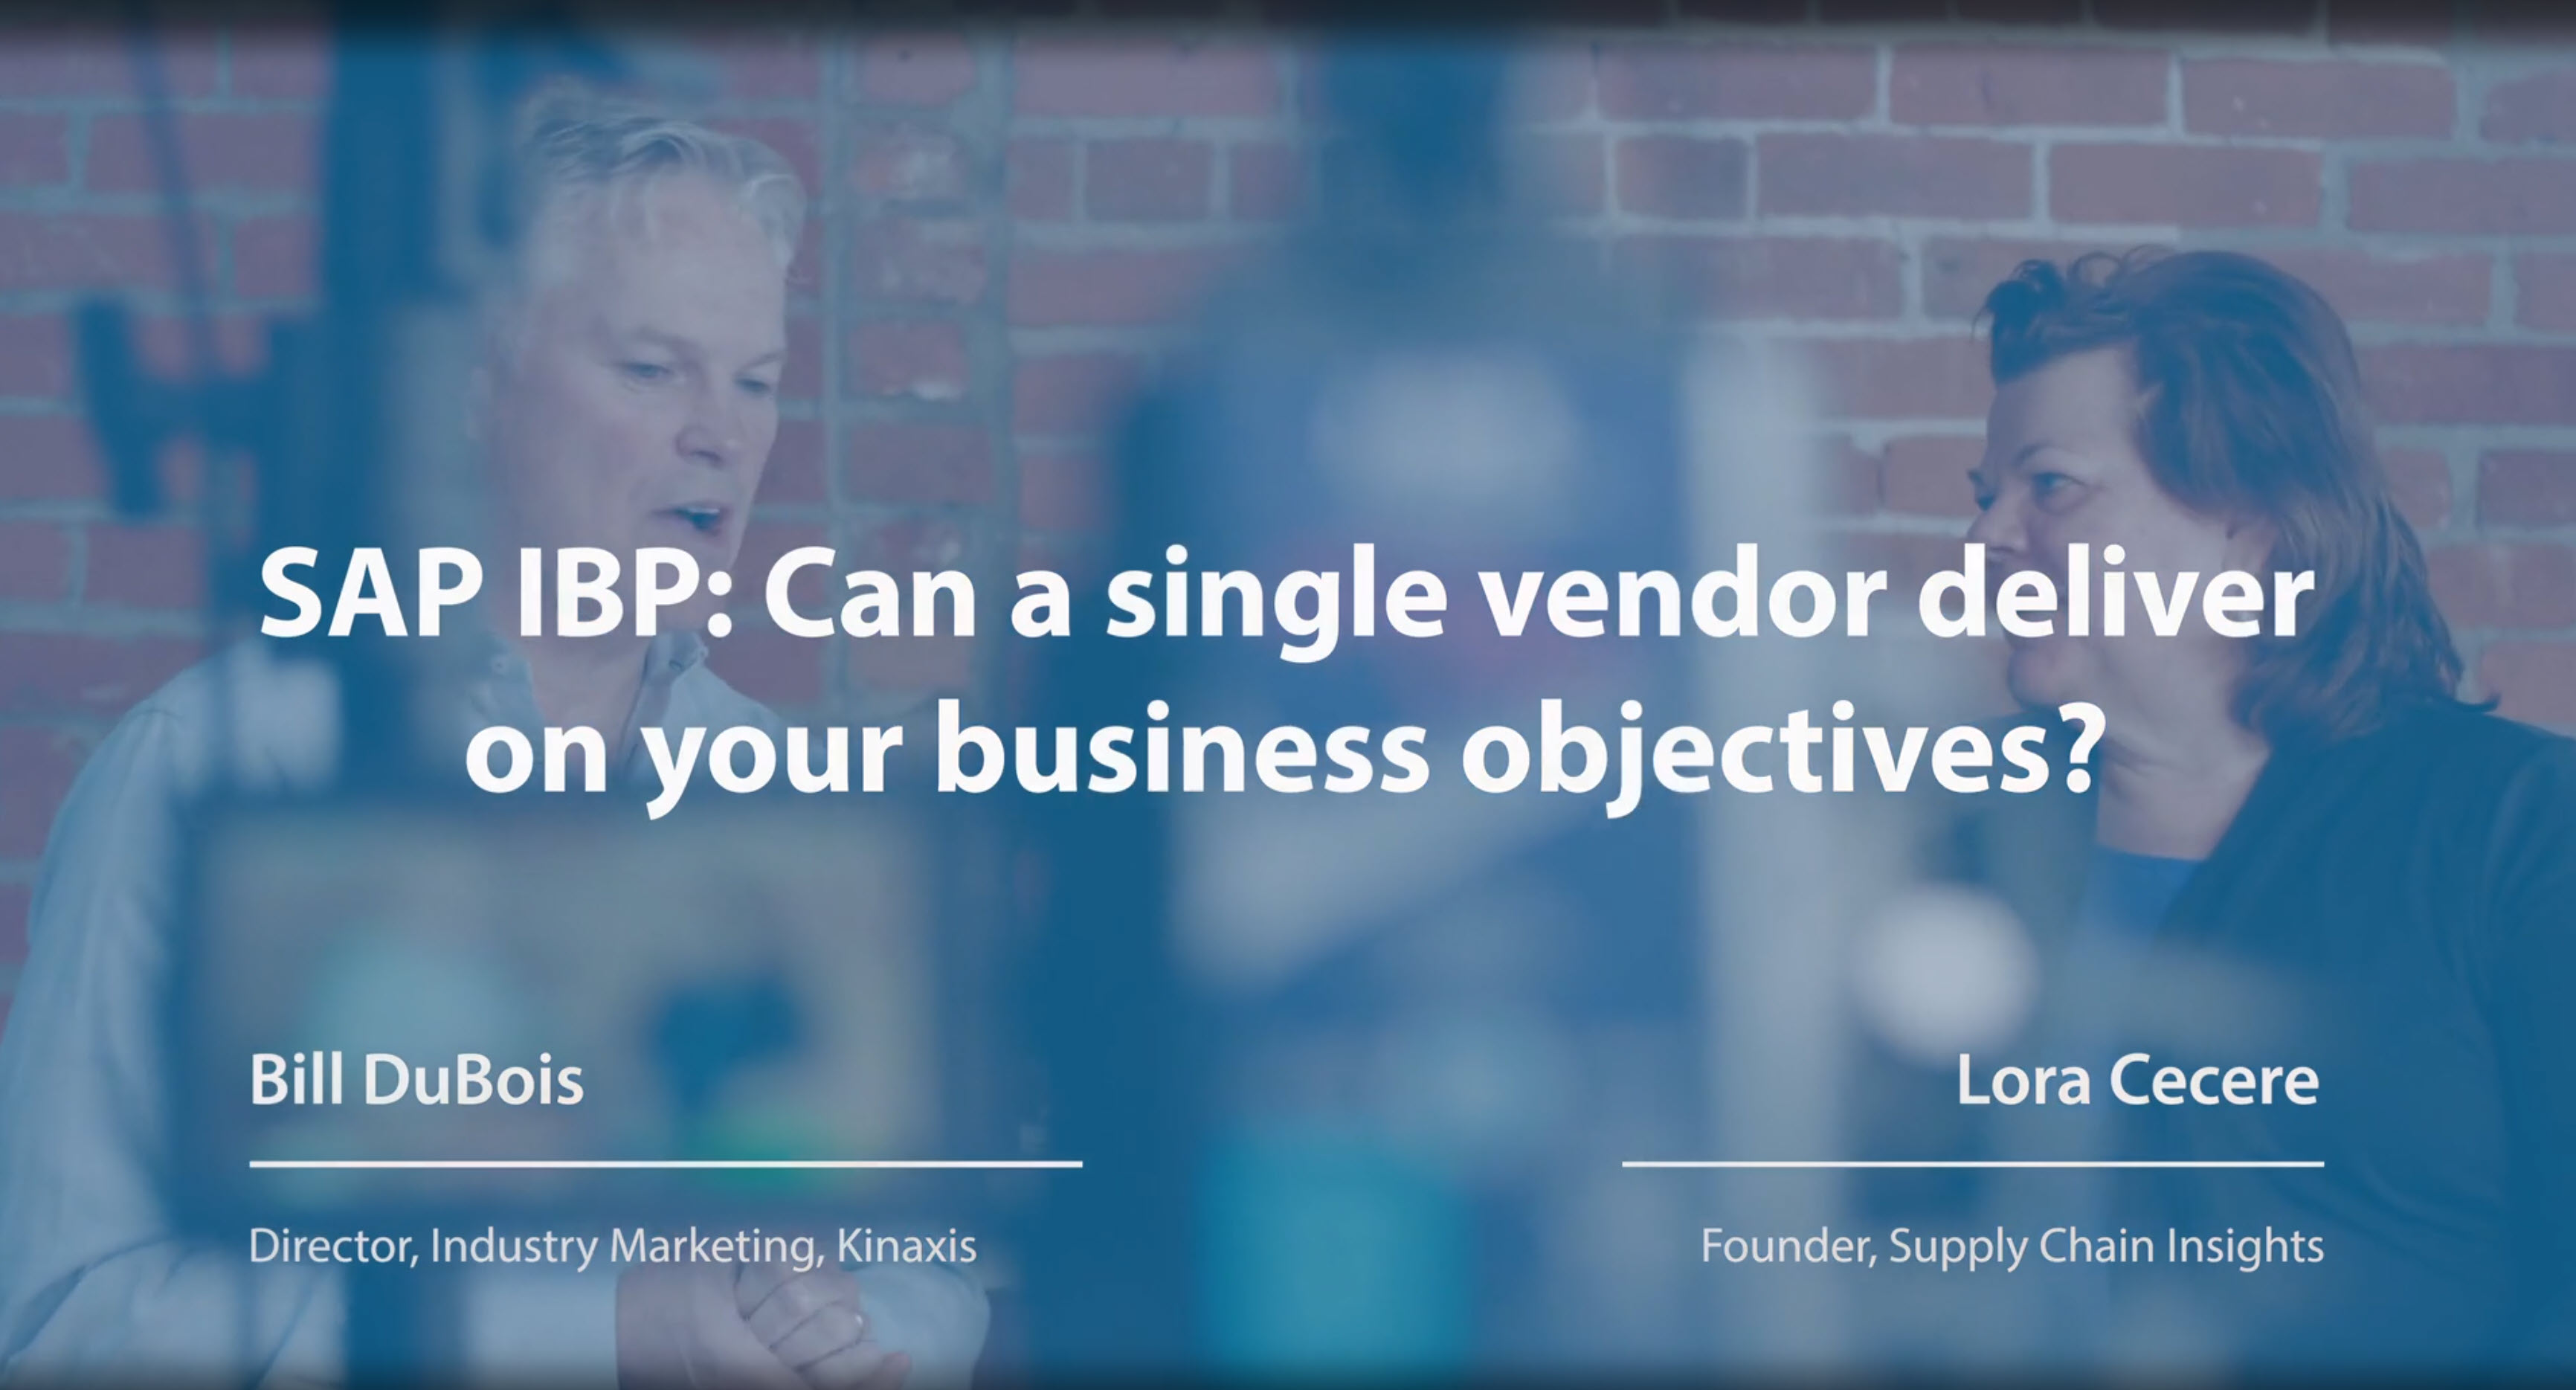 SAP IBP: Can a single vendor deliver on your business objectives?